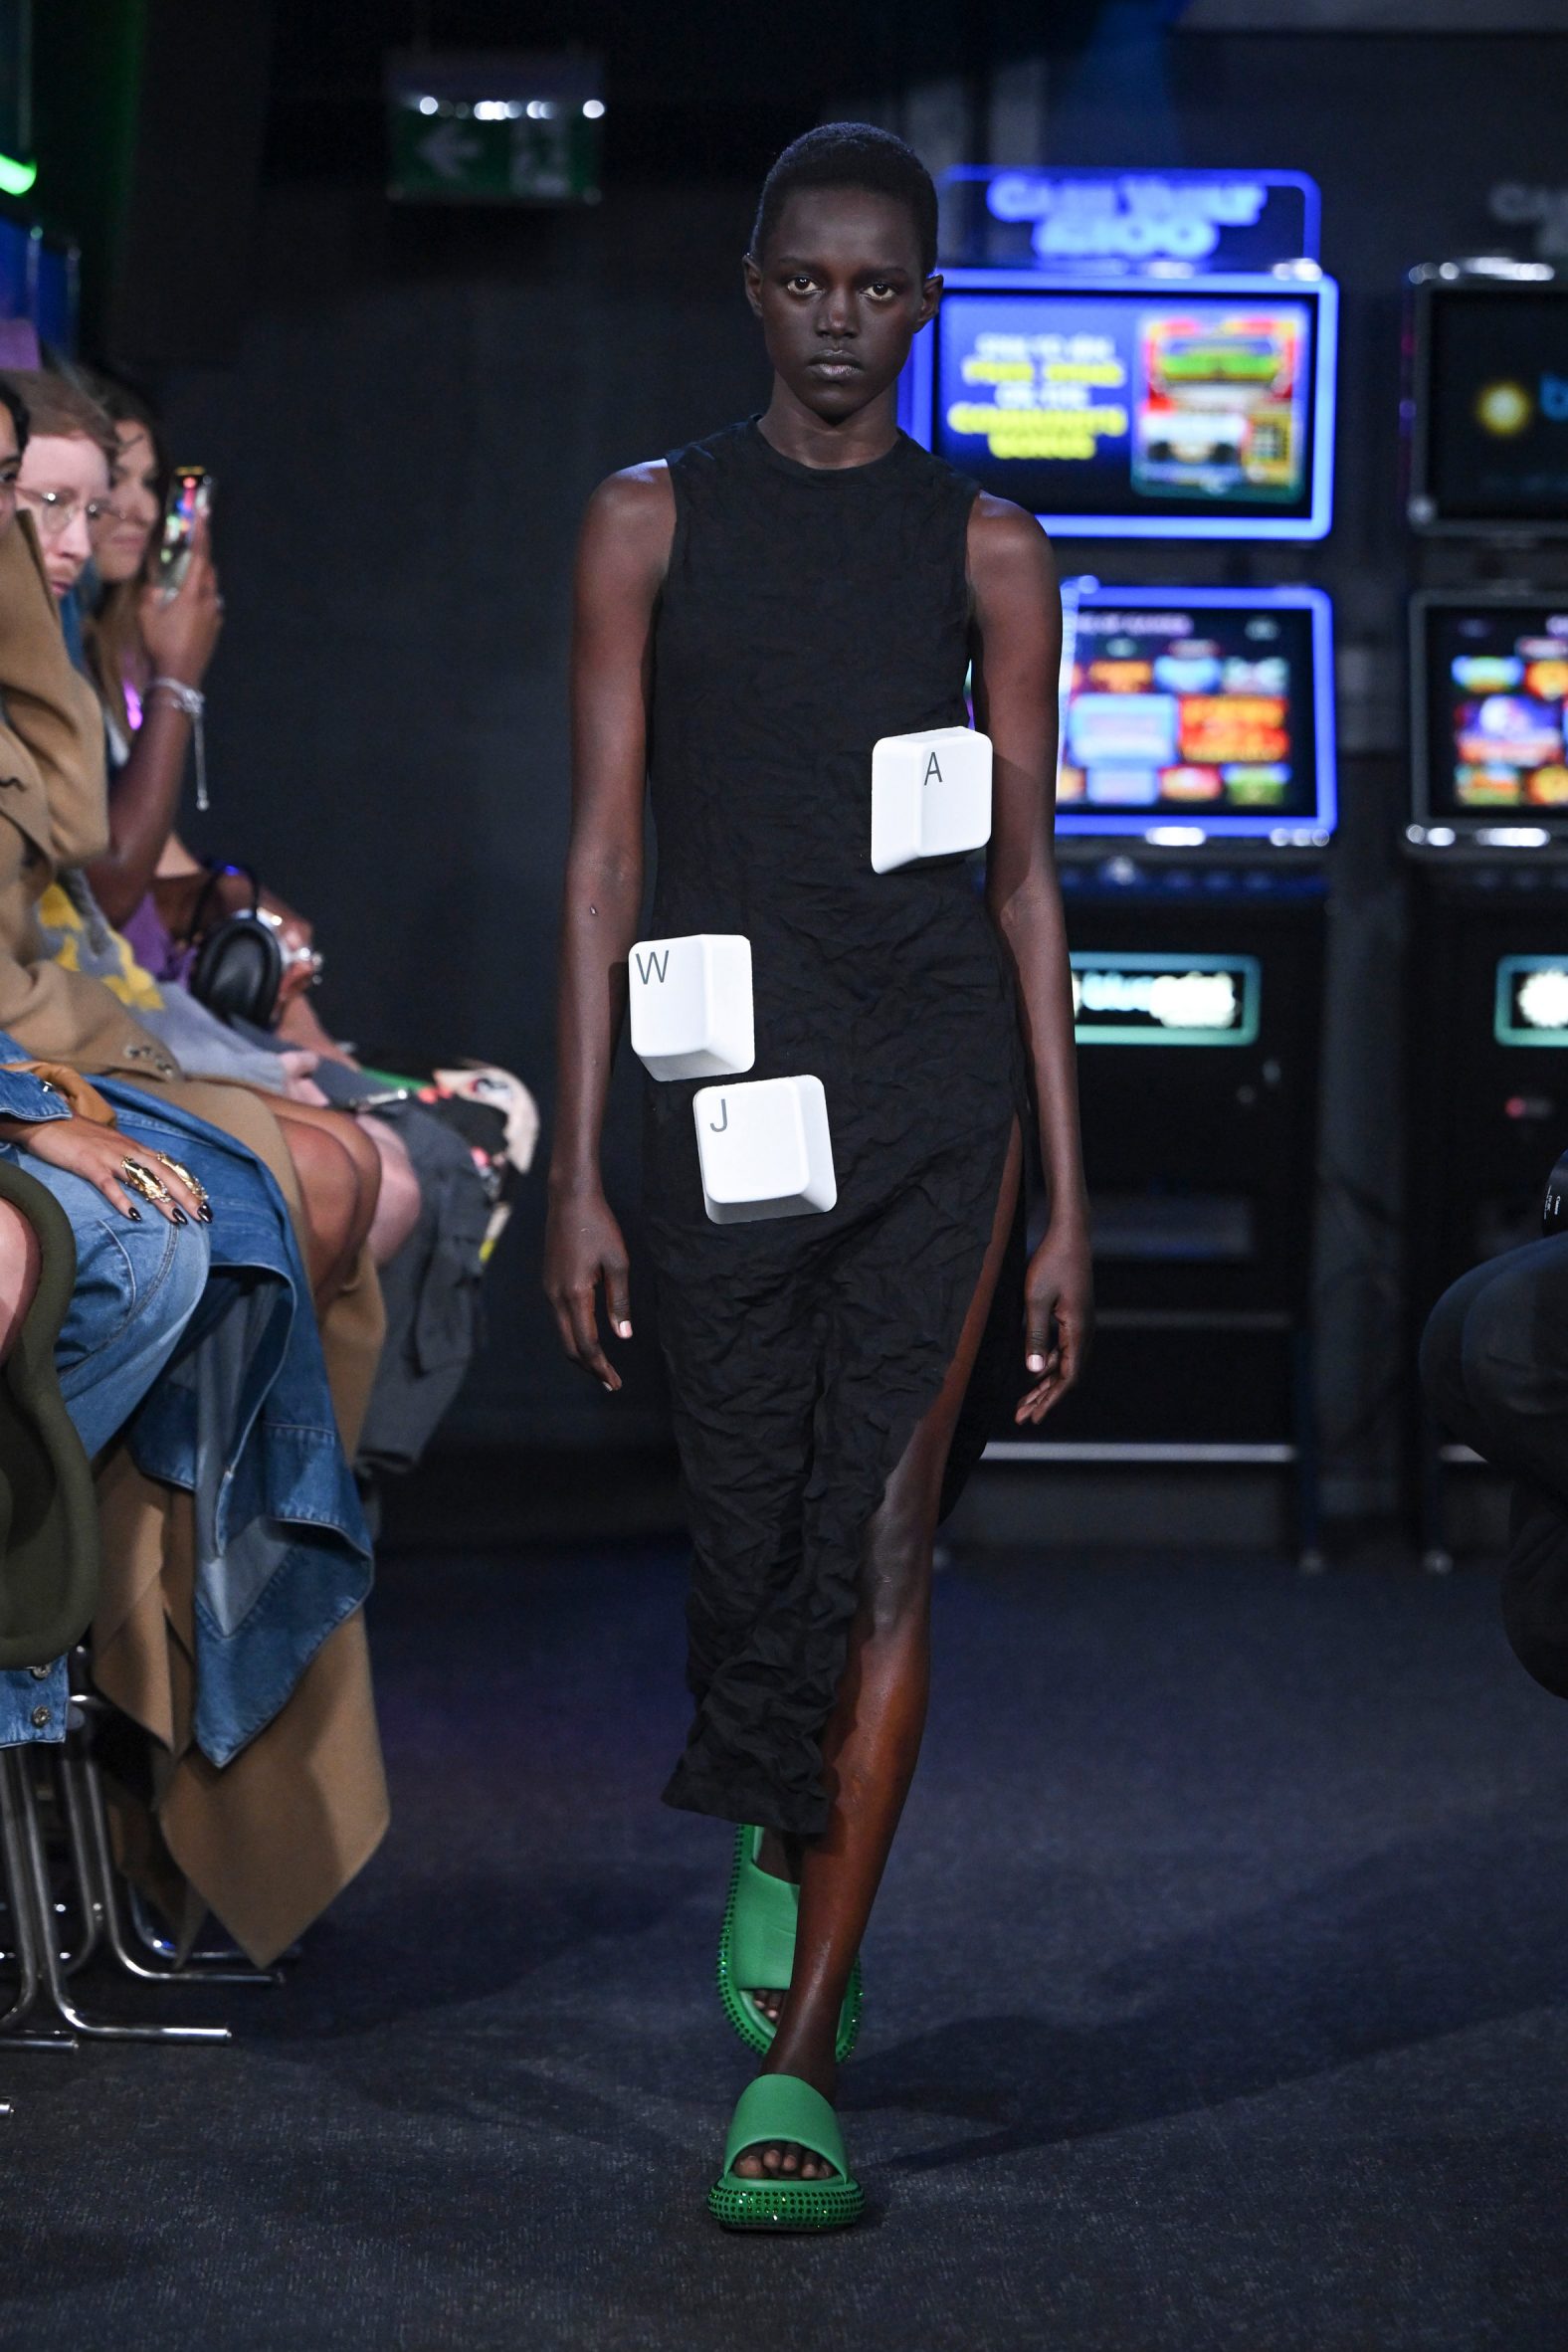 Spring-Summer 2023 Show Collection for New